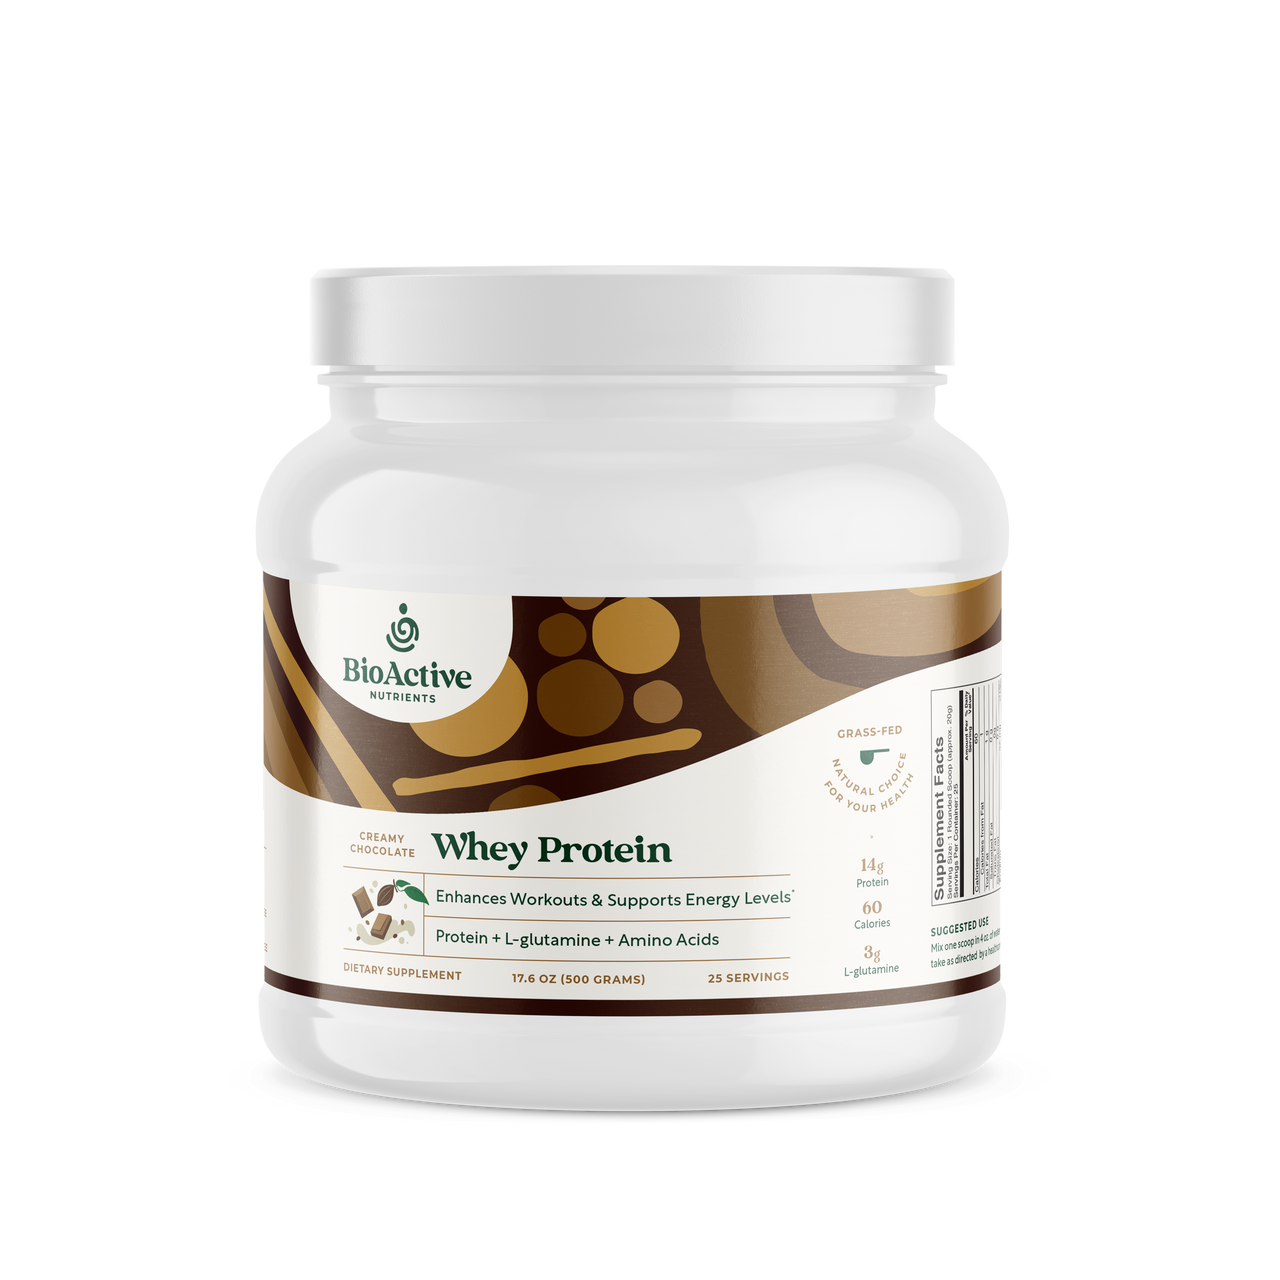 https://cdn11.bigcommerce.com/s-w7nb44axkf/images/stencil/1280x1280/products/167/1241/BioActive_ChocolateWheyProtein_Mock__32922.1661789485.png?c=2